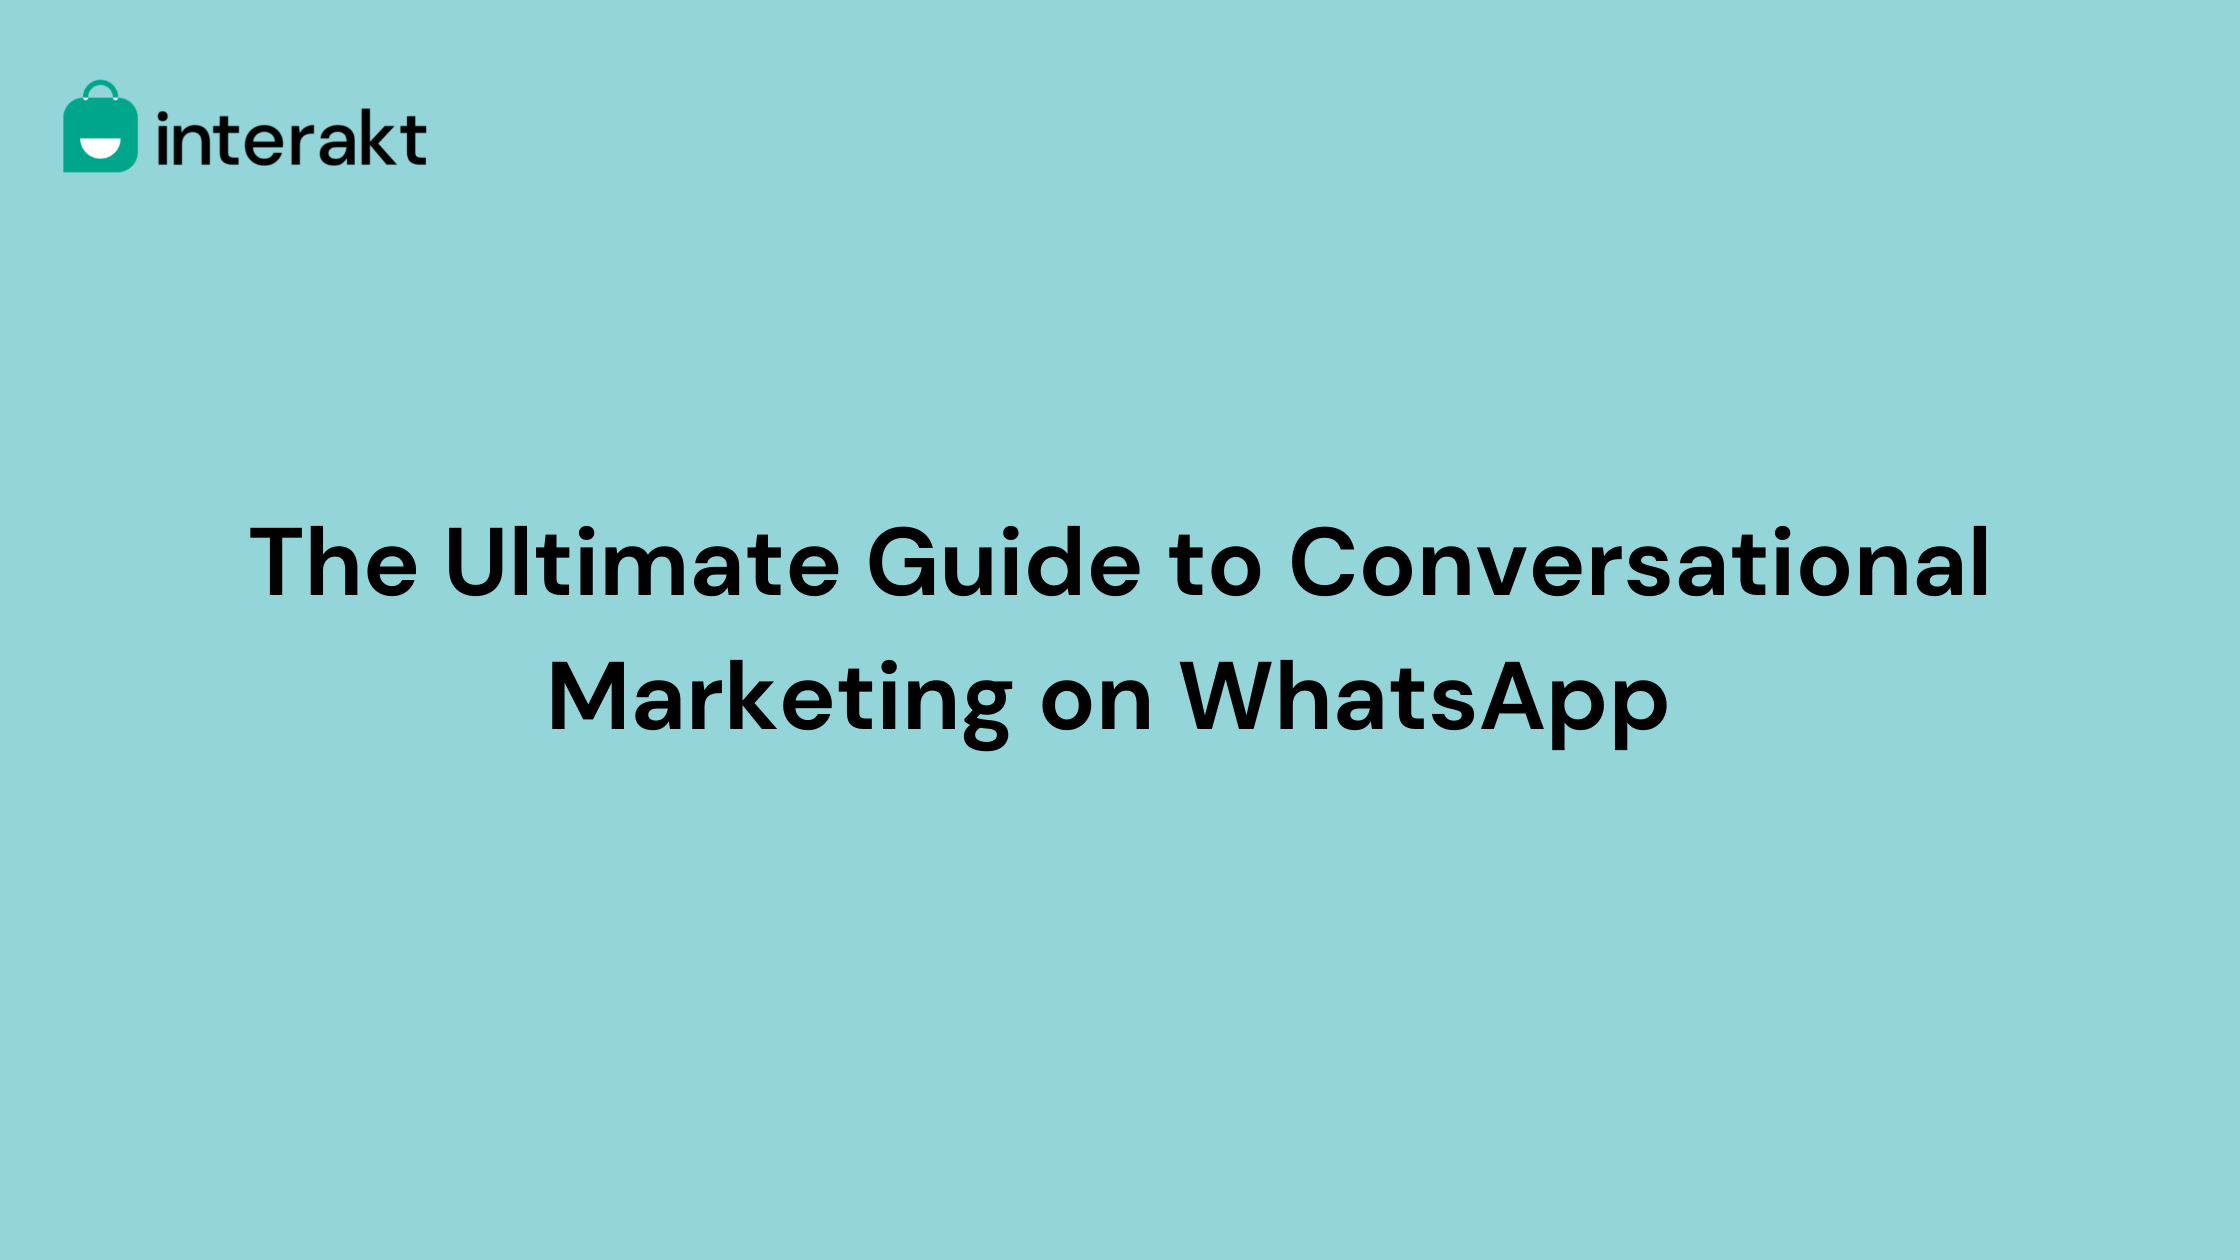 The Ultimate Guide to Conversational Marketing on WhatsApp